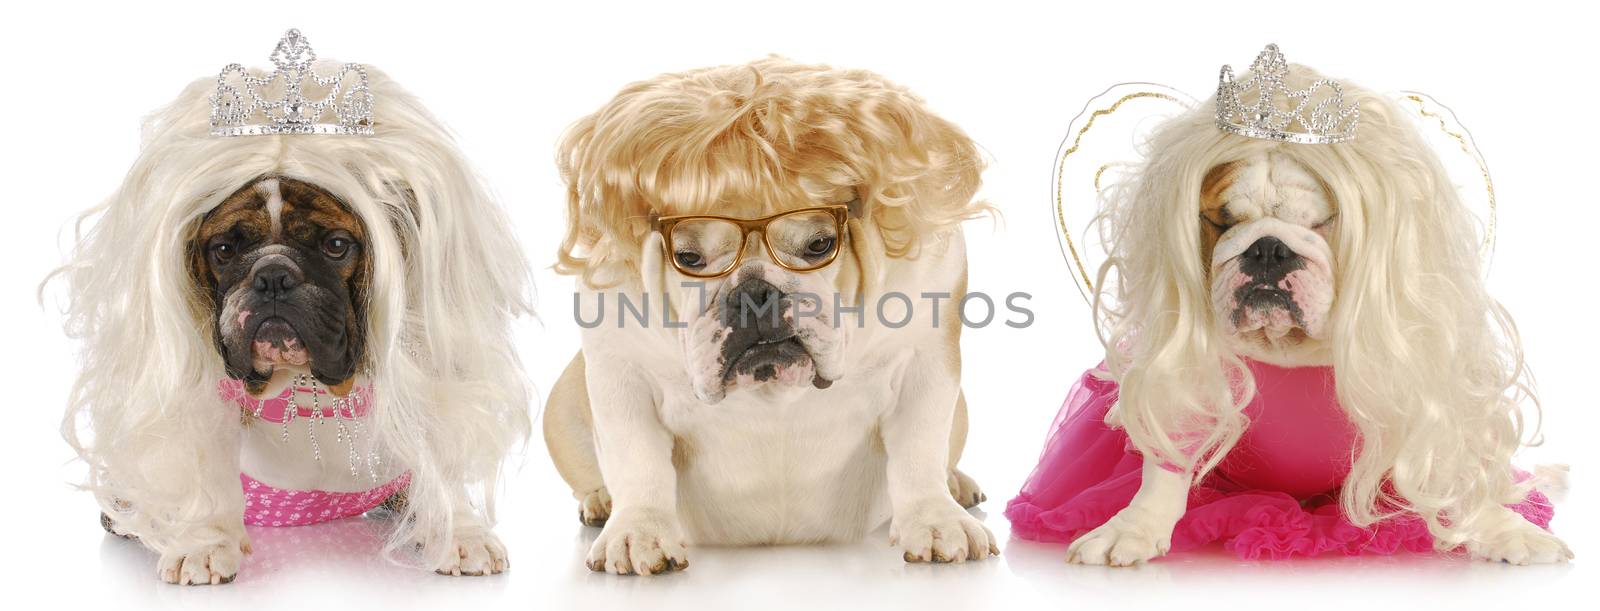 three divas - english bulldogs with sour expressions wearing female clothing on white background